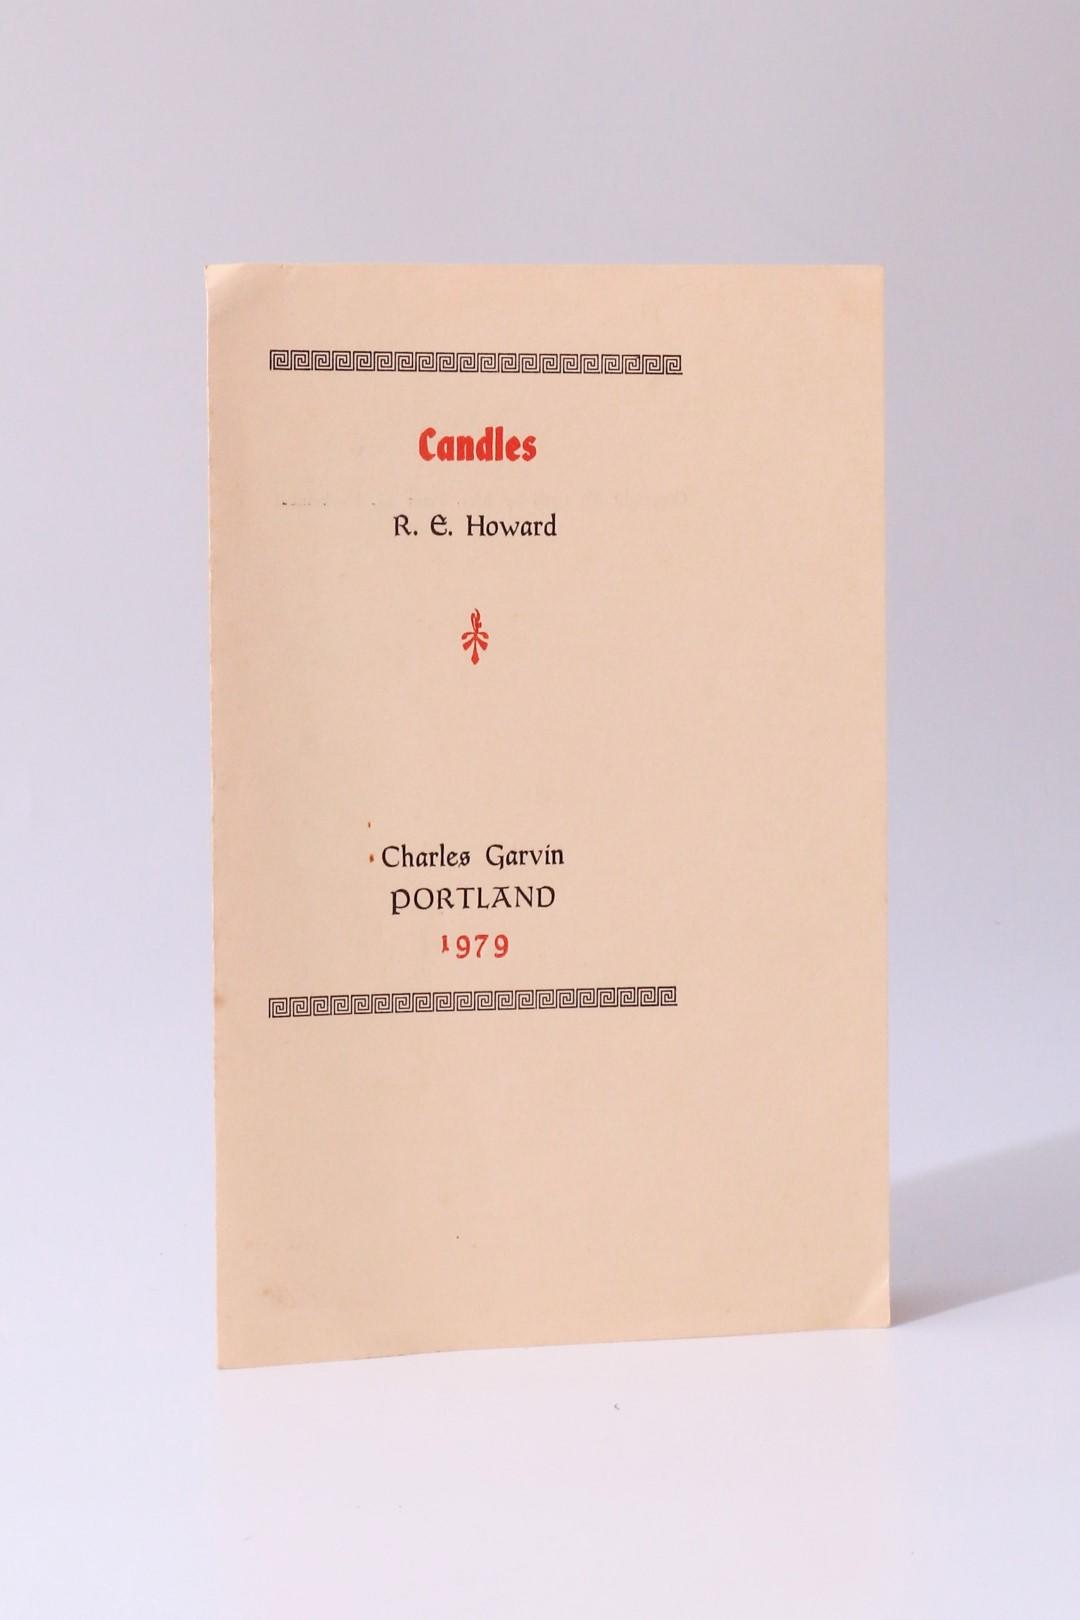 R.E. Howard - Candles - Charles Garvin, 1979, Limited Edition.